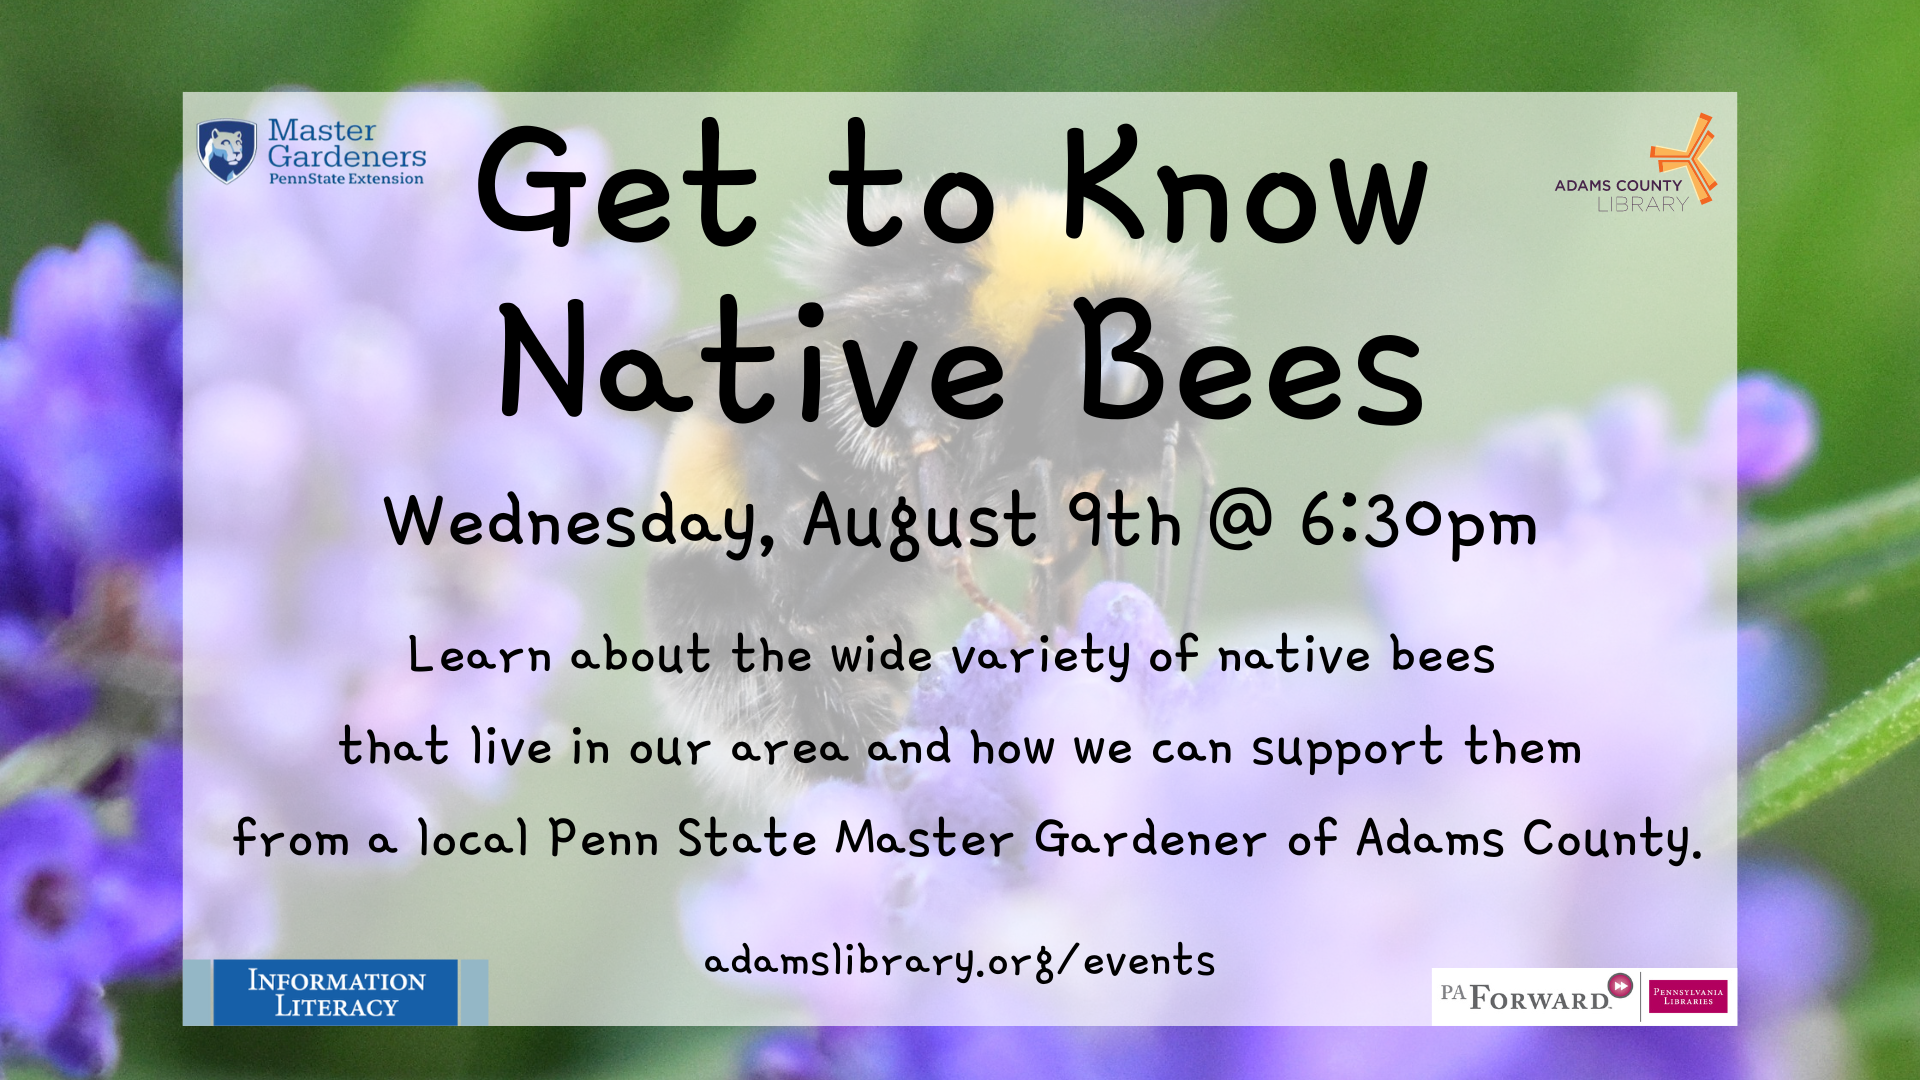 Get to Know Native Bees